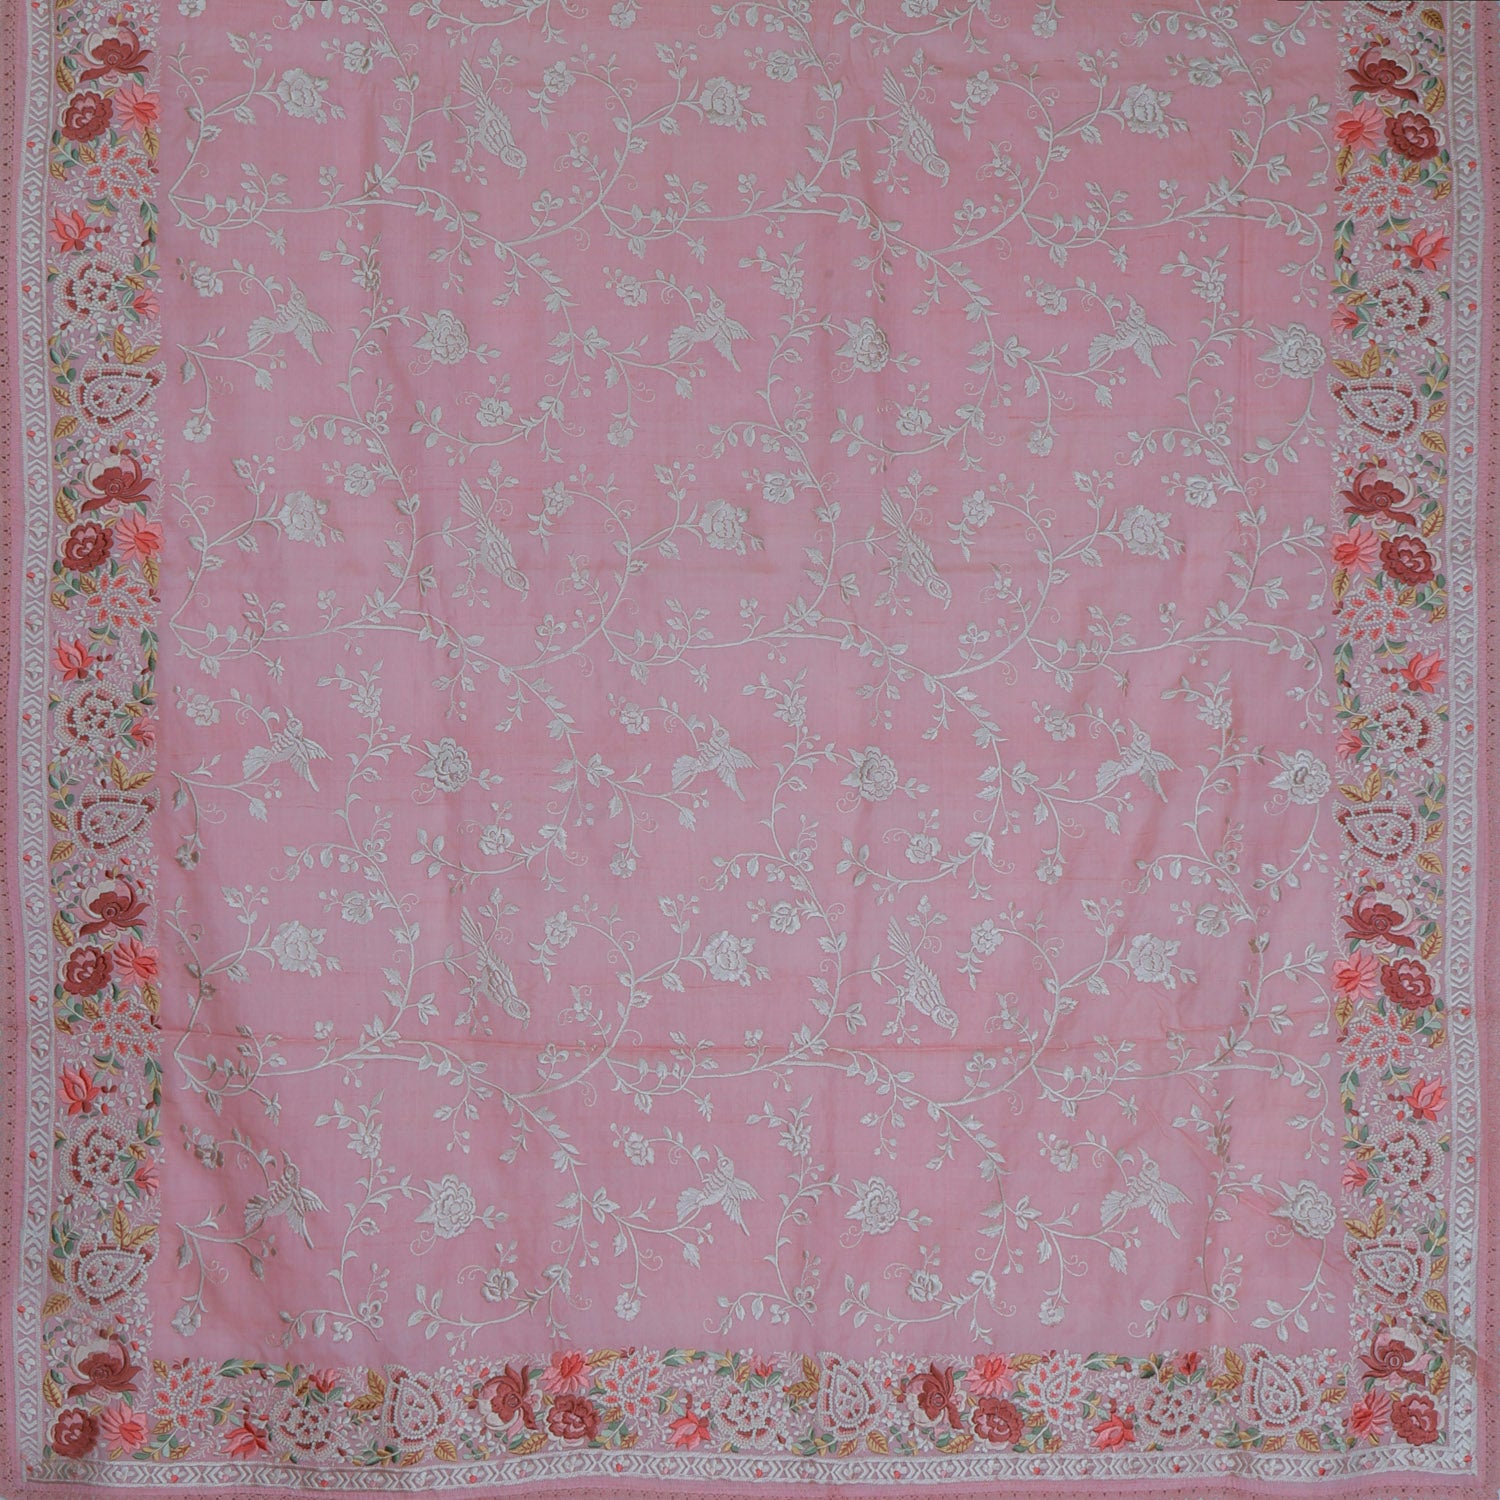 Pastel Pink Tussar Saree With Floral Embroidered Pattern - Singhania's